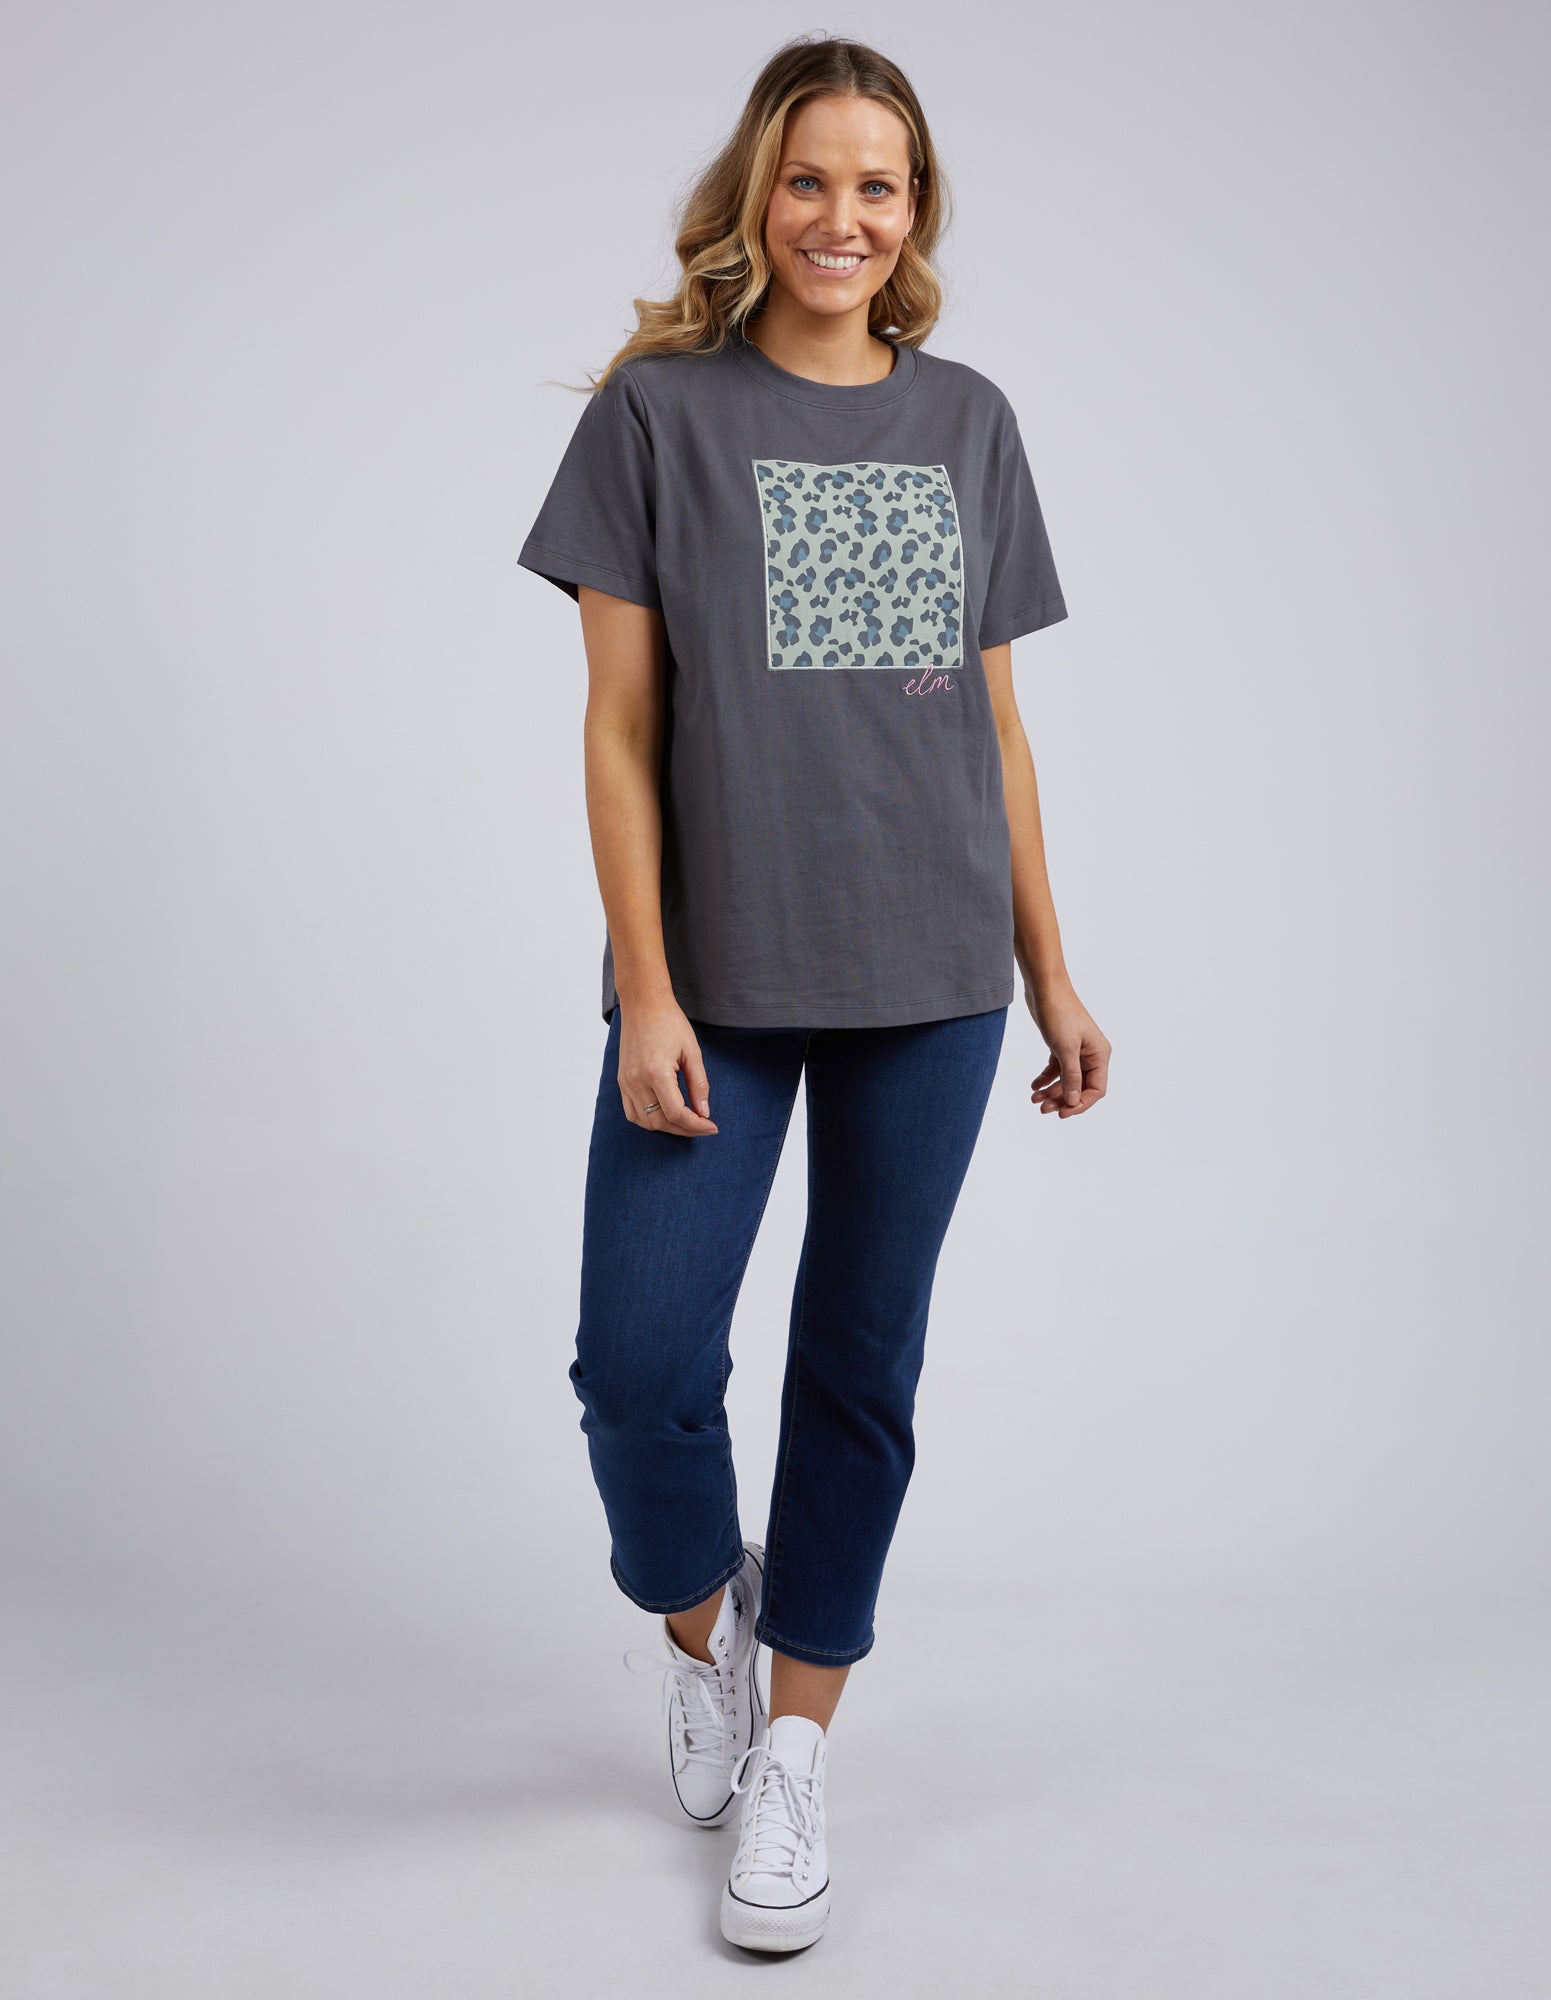 Wild About You Tee Charcoal